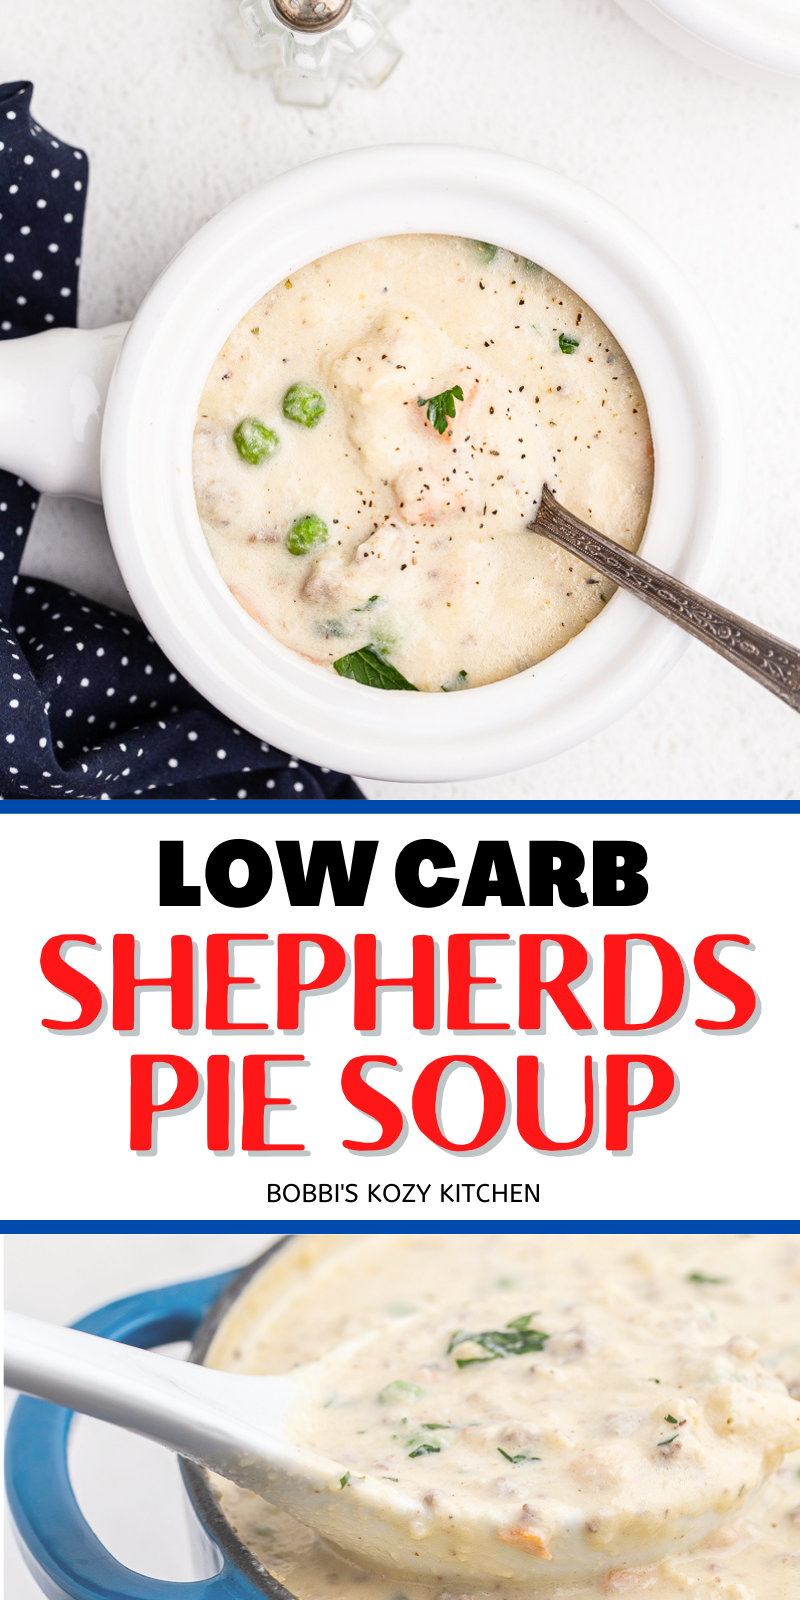 Low Carb Shepherd's Pie Soup - This soup takes classic comfort food and turns it into a hearty, flavorful low carb soup the whole family will love!